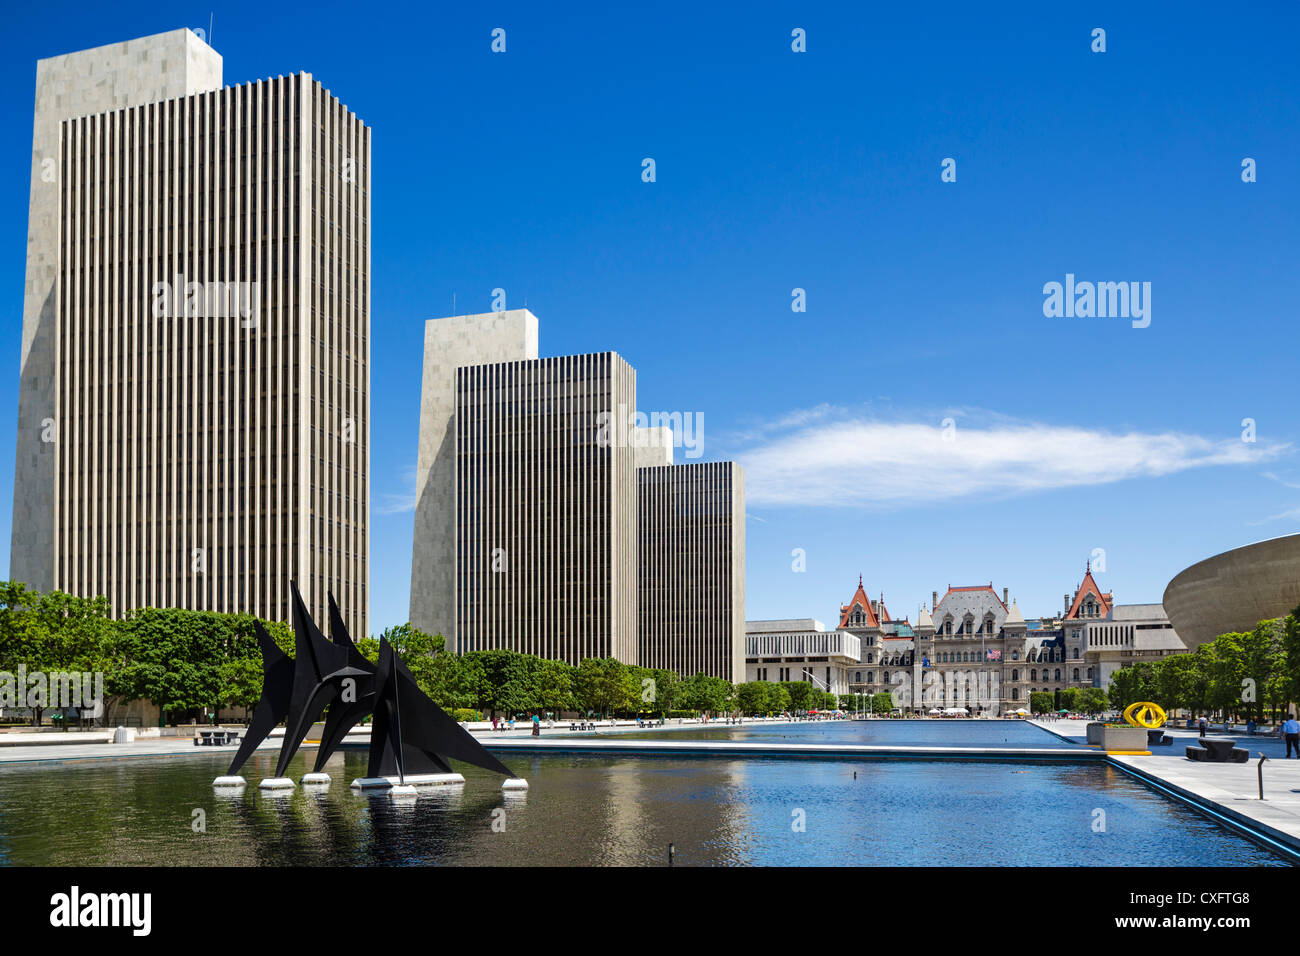 The Nelson A Rockefeller Empire State Plaza looking towards State Capitol with 'The Egg' to right, Albany, New York State, USA Stock Photo